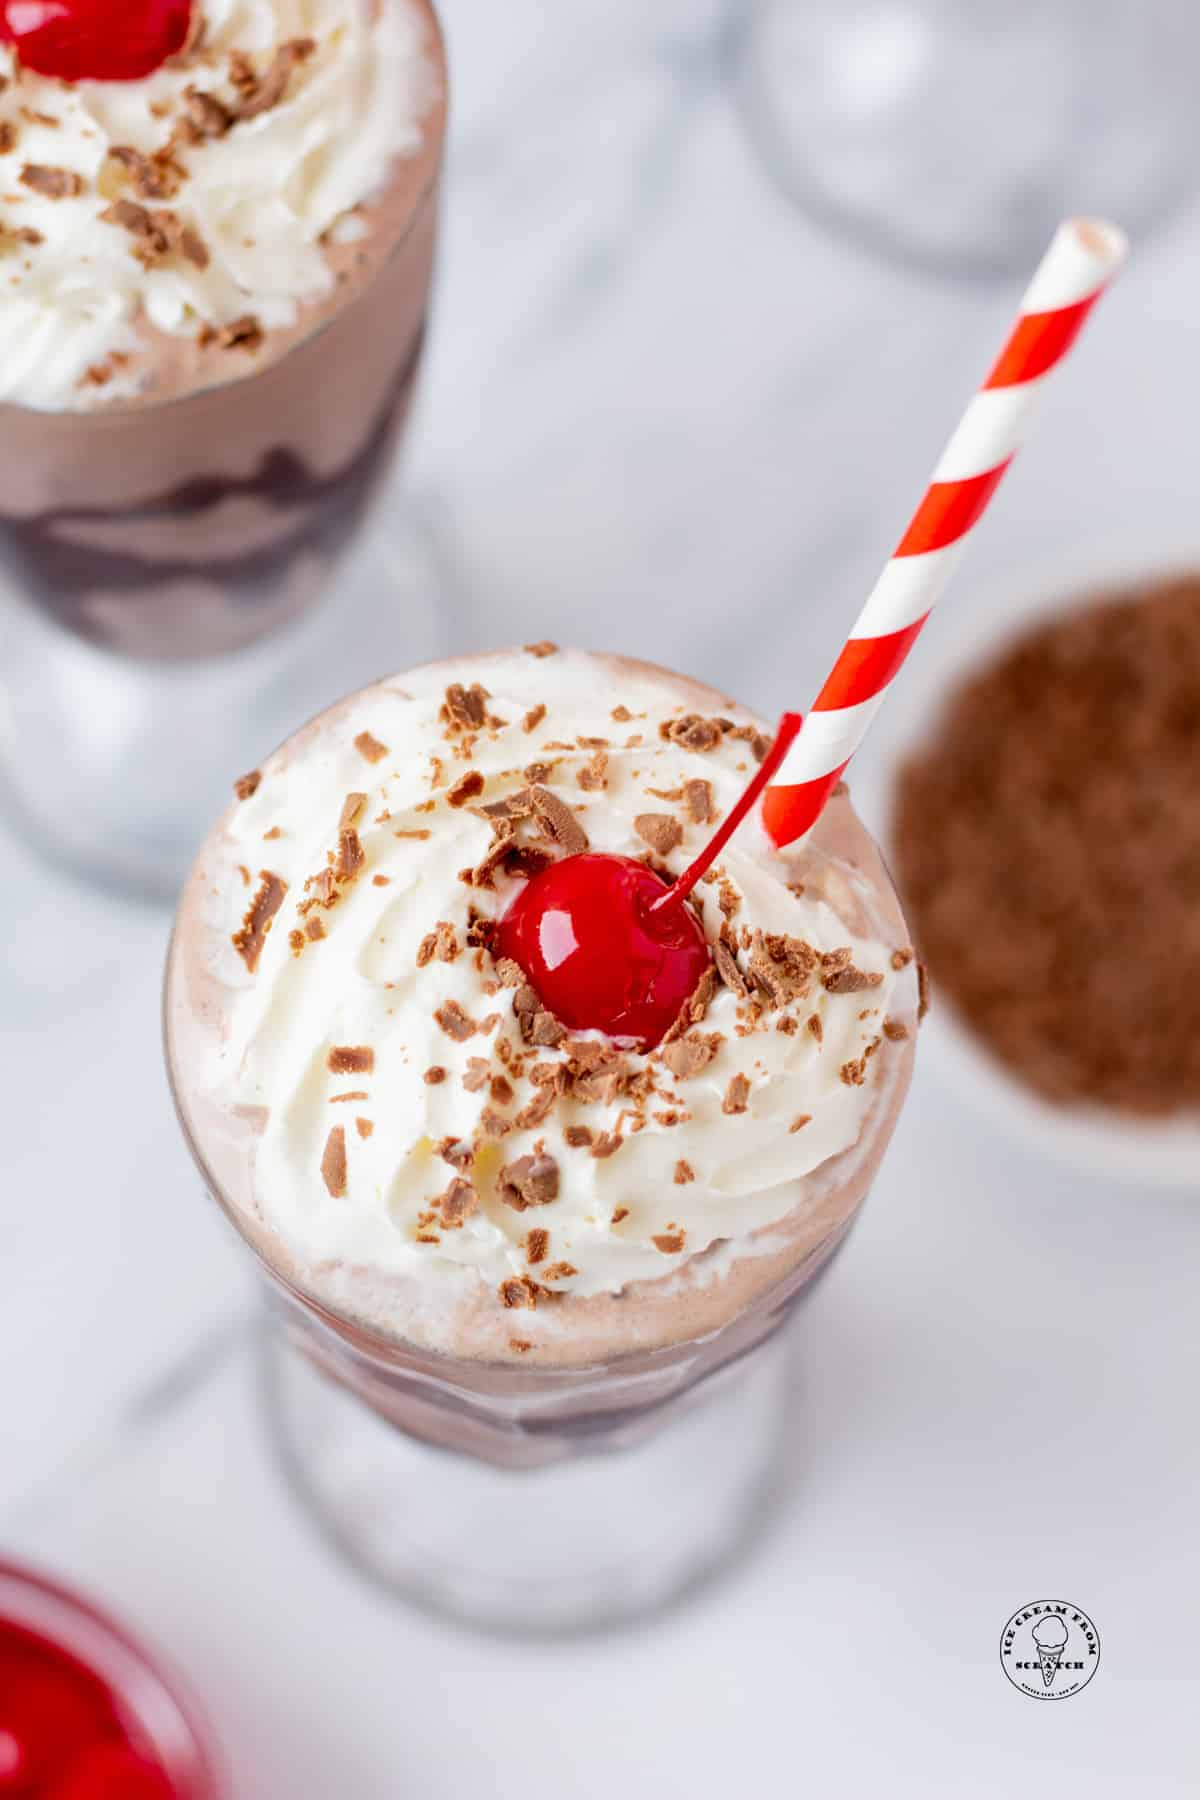 overhead view of a chocolate milkshake topped with whipped cream and a cherry, with a red and white straw.